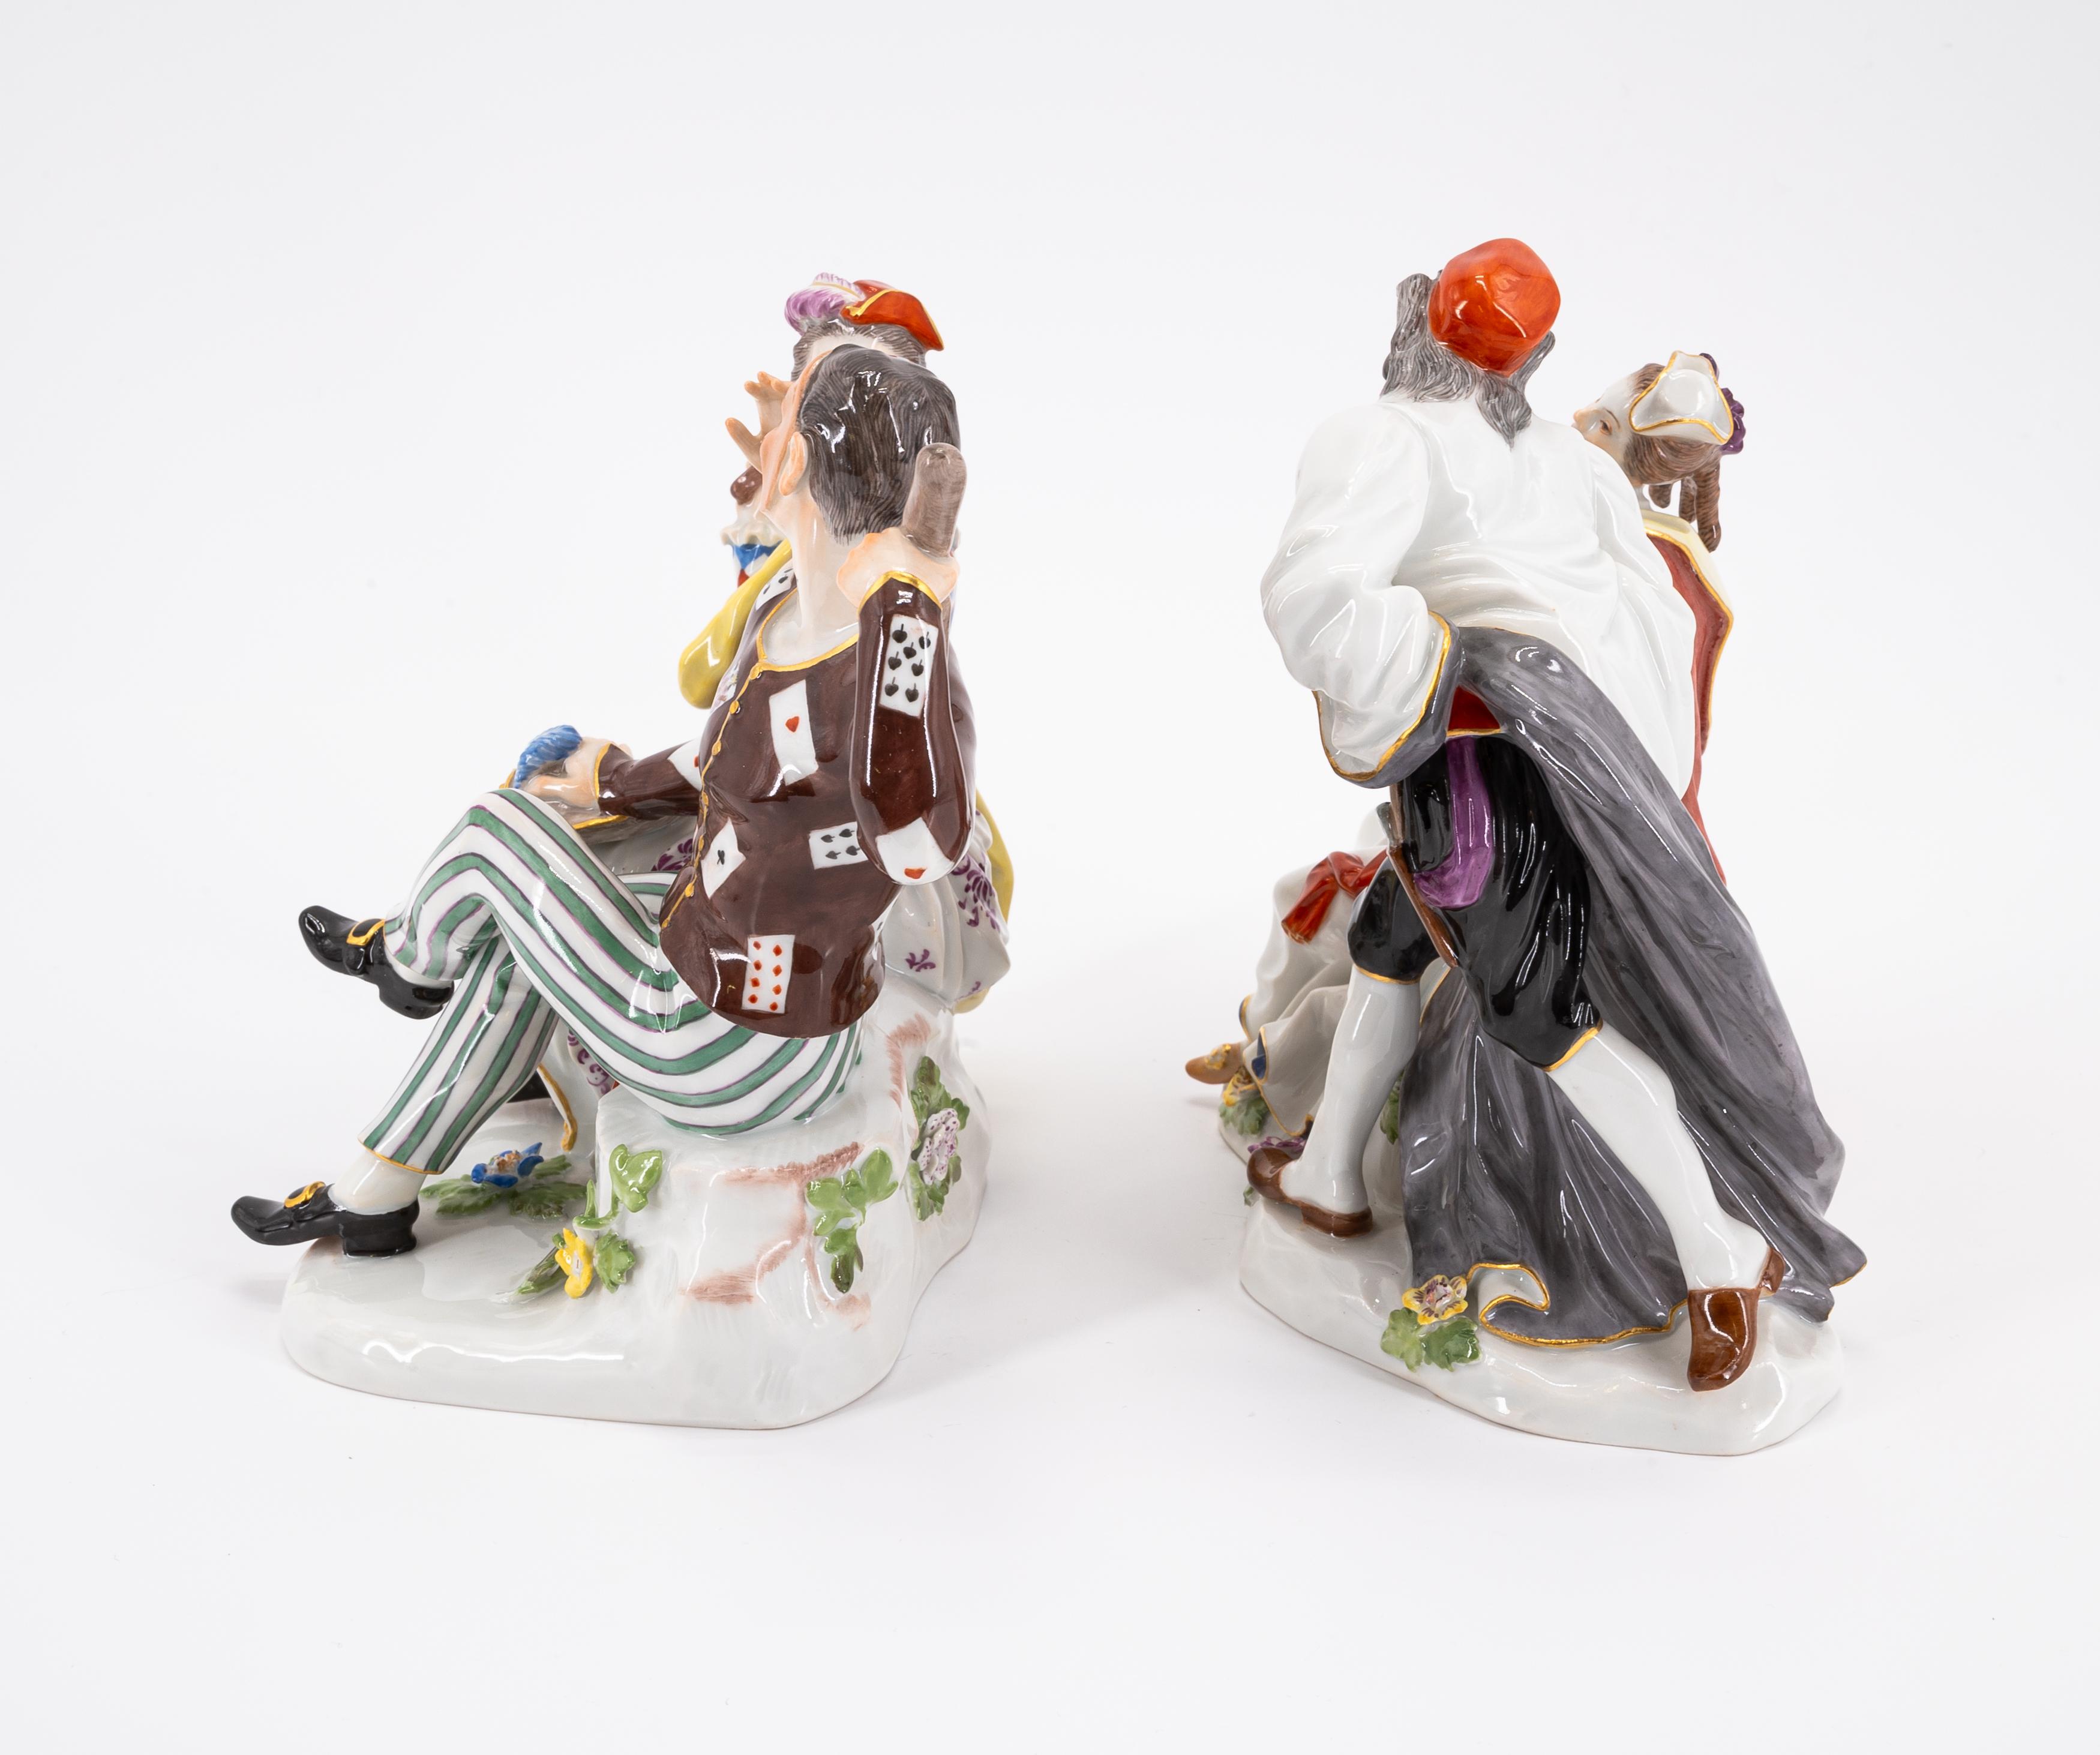 FOUR LARGE PORCELAIN COUPLES FROM THE COMMEDIA DELL'ARTE - Image 6 of 9